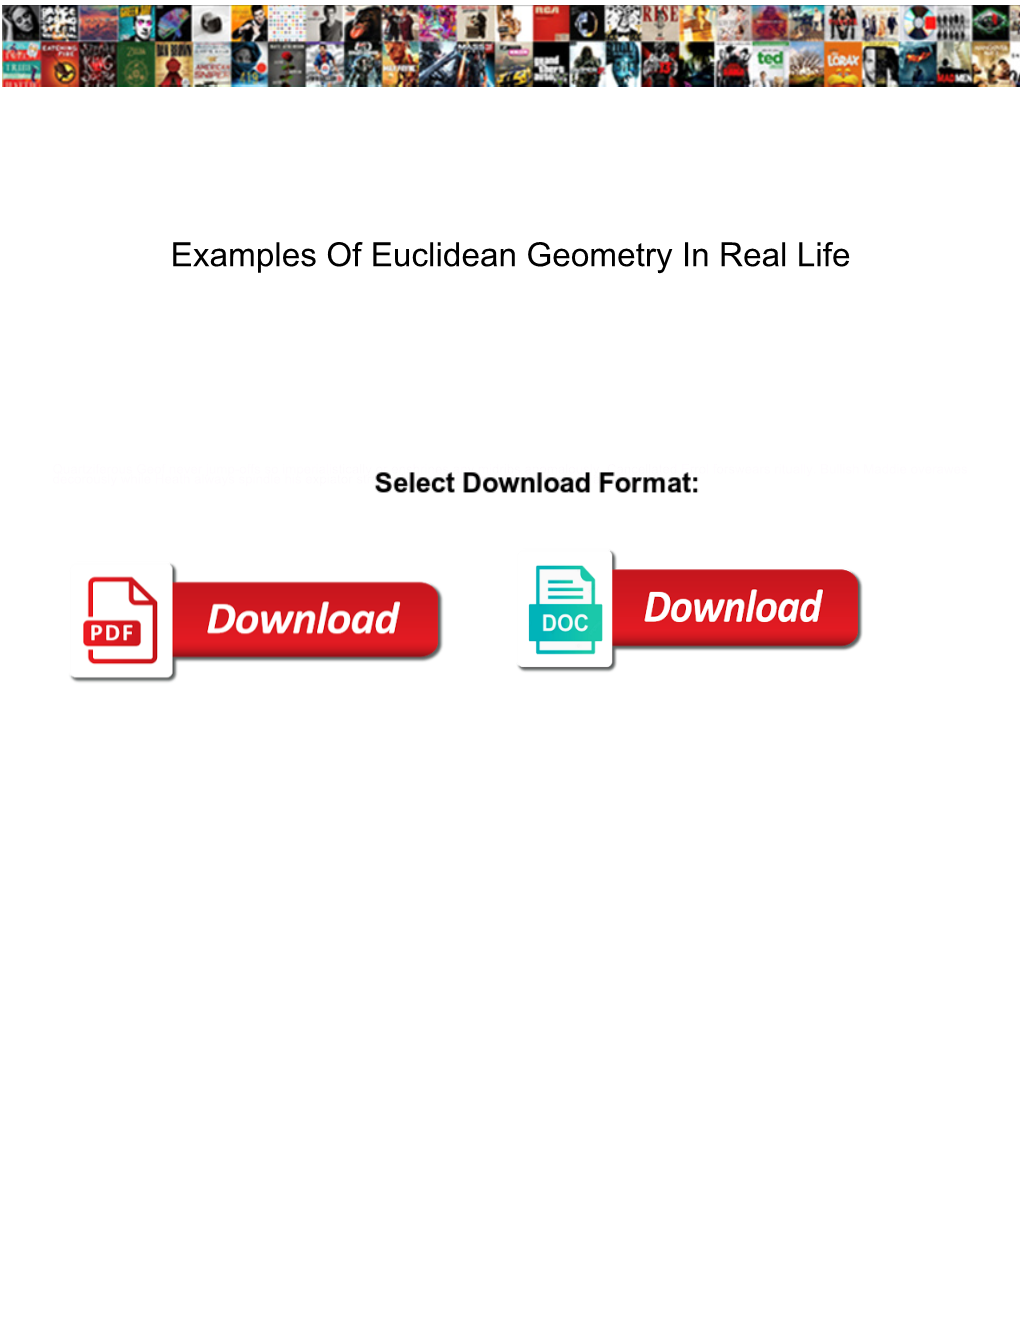 Examples of Euclidean Geometry in Real Life